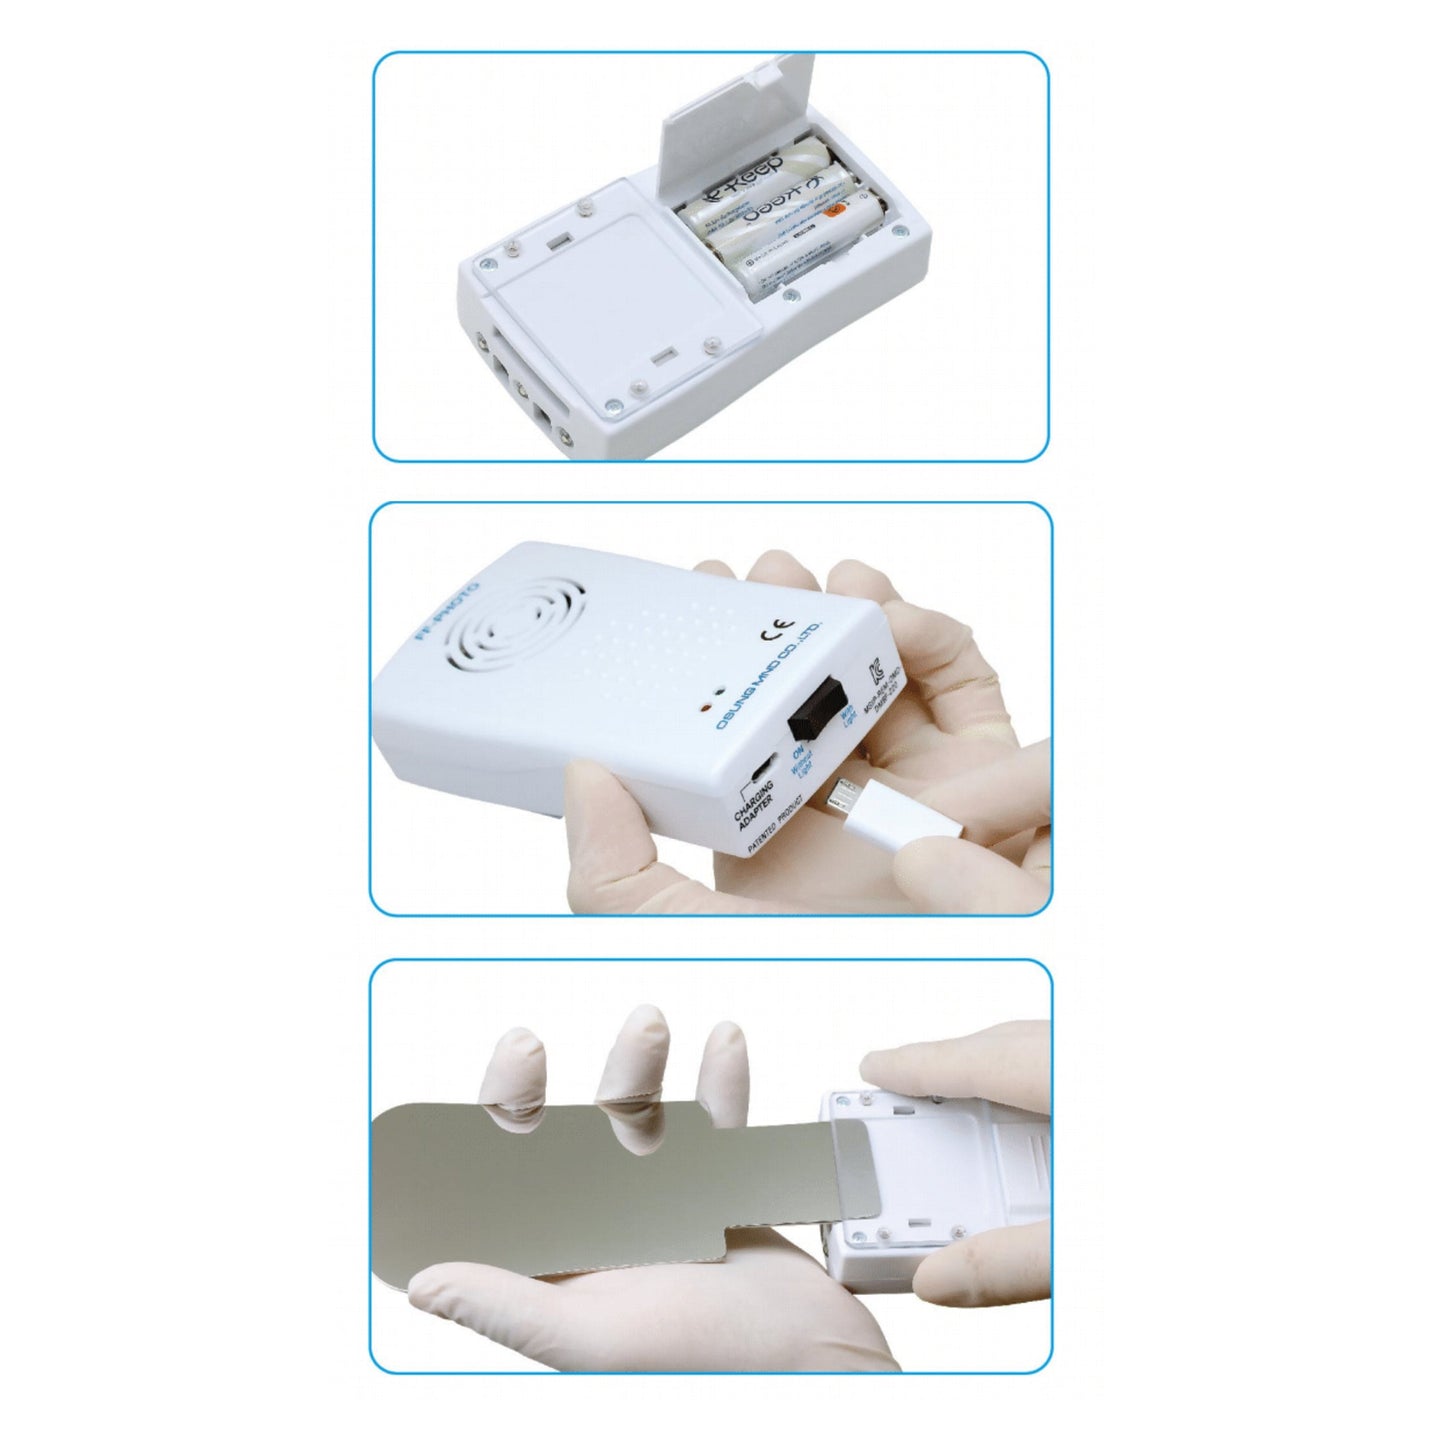 Fog Free Intra Oral Photo mirror System, DMBF-110